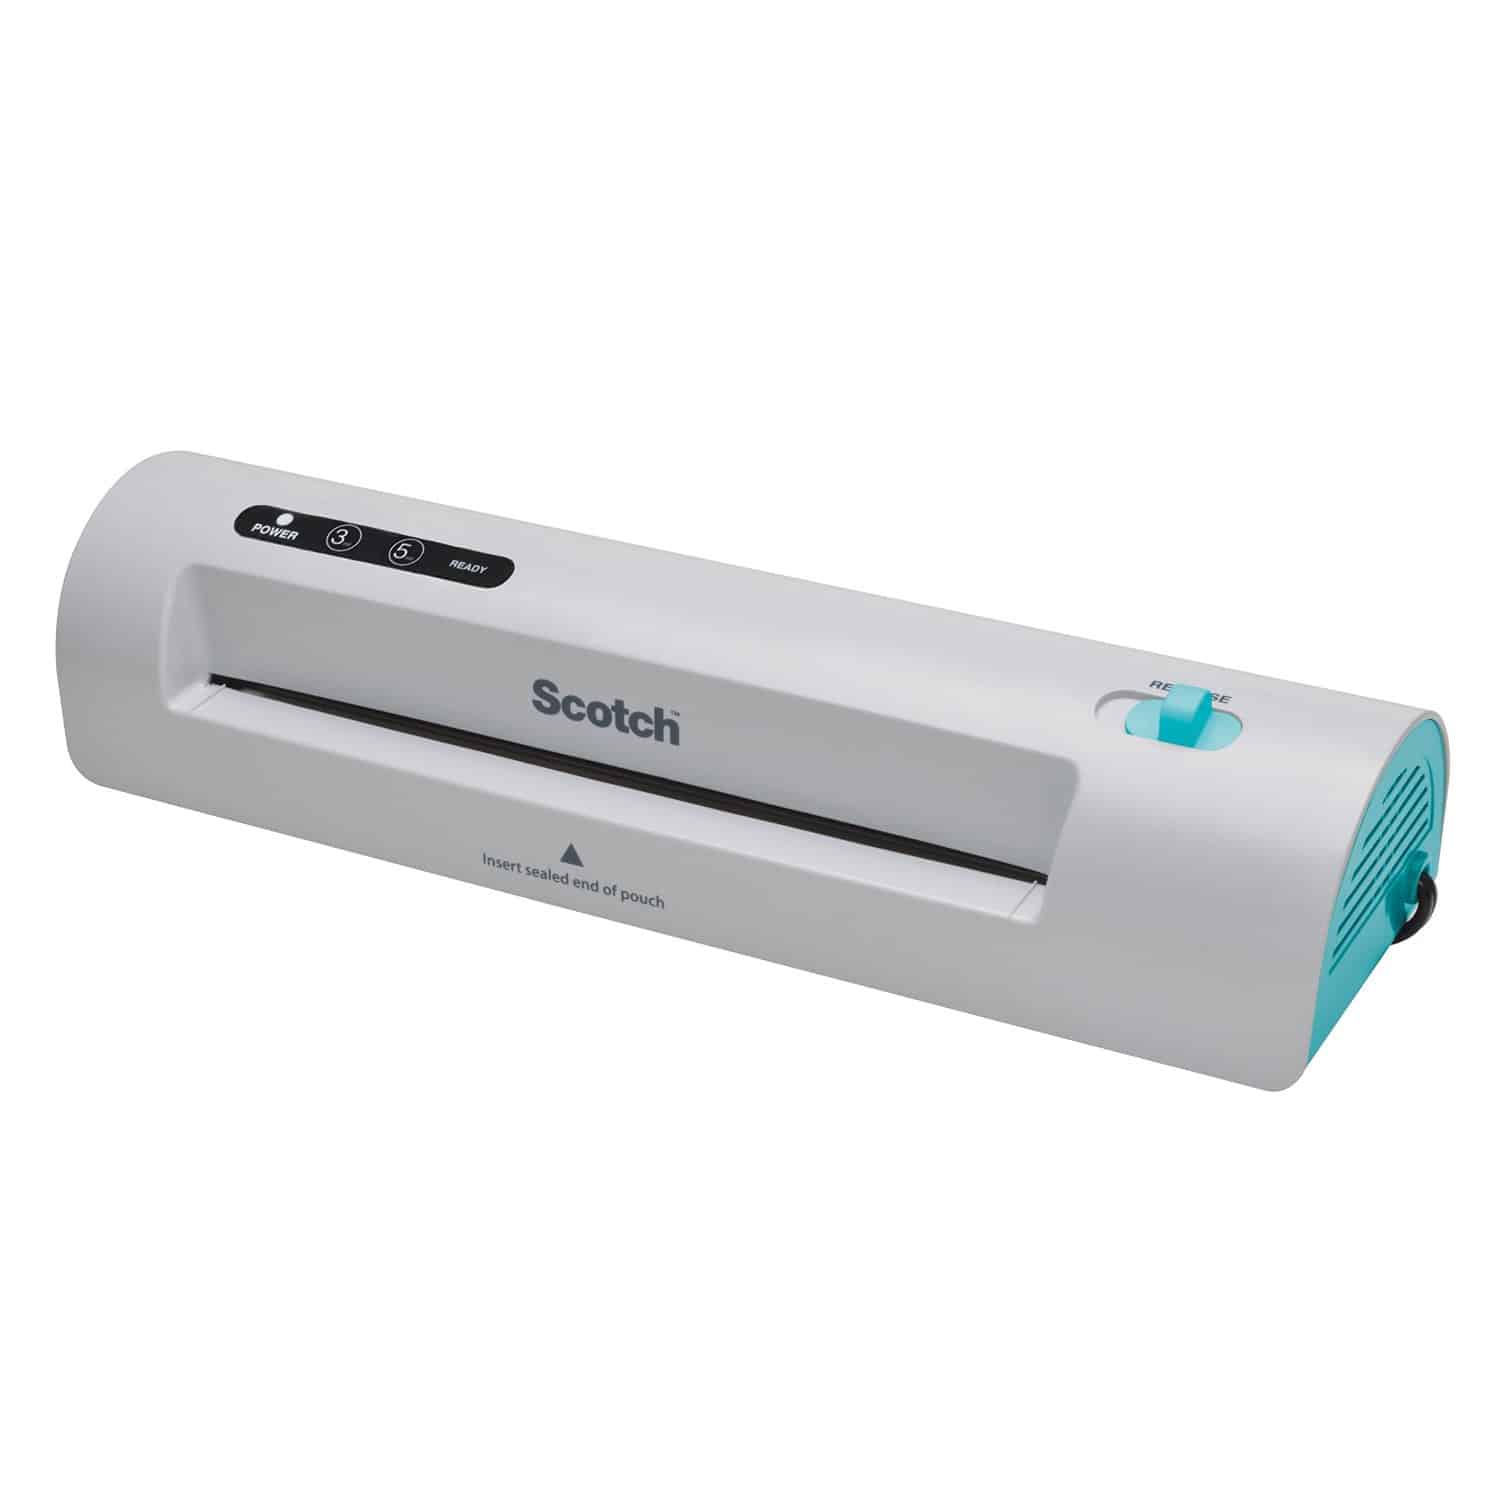 LIGHTNING DEAL ALERT! Scotch TL901C-T Thermal Laminator, 2 Roller System, Fast Warm-up, Quick Laminating Speed (White)